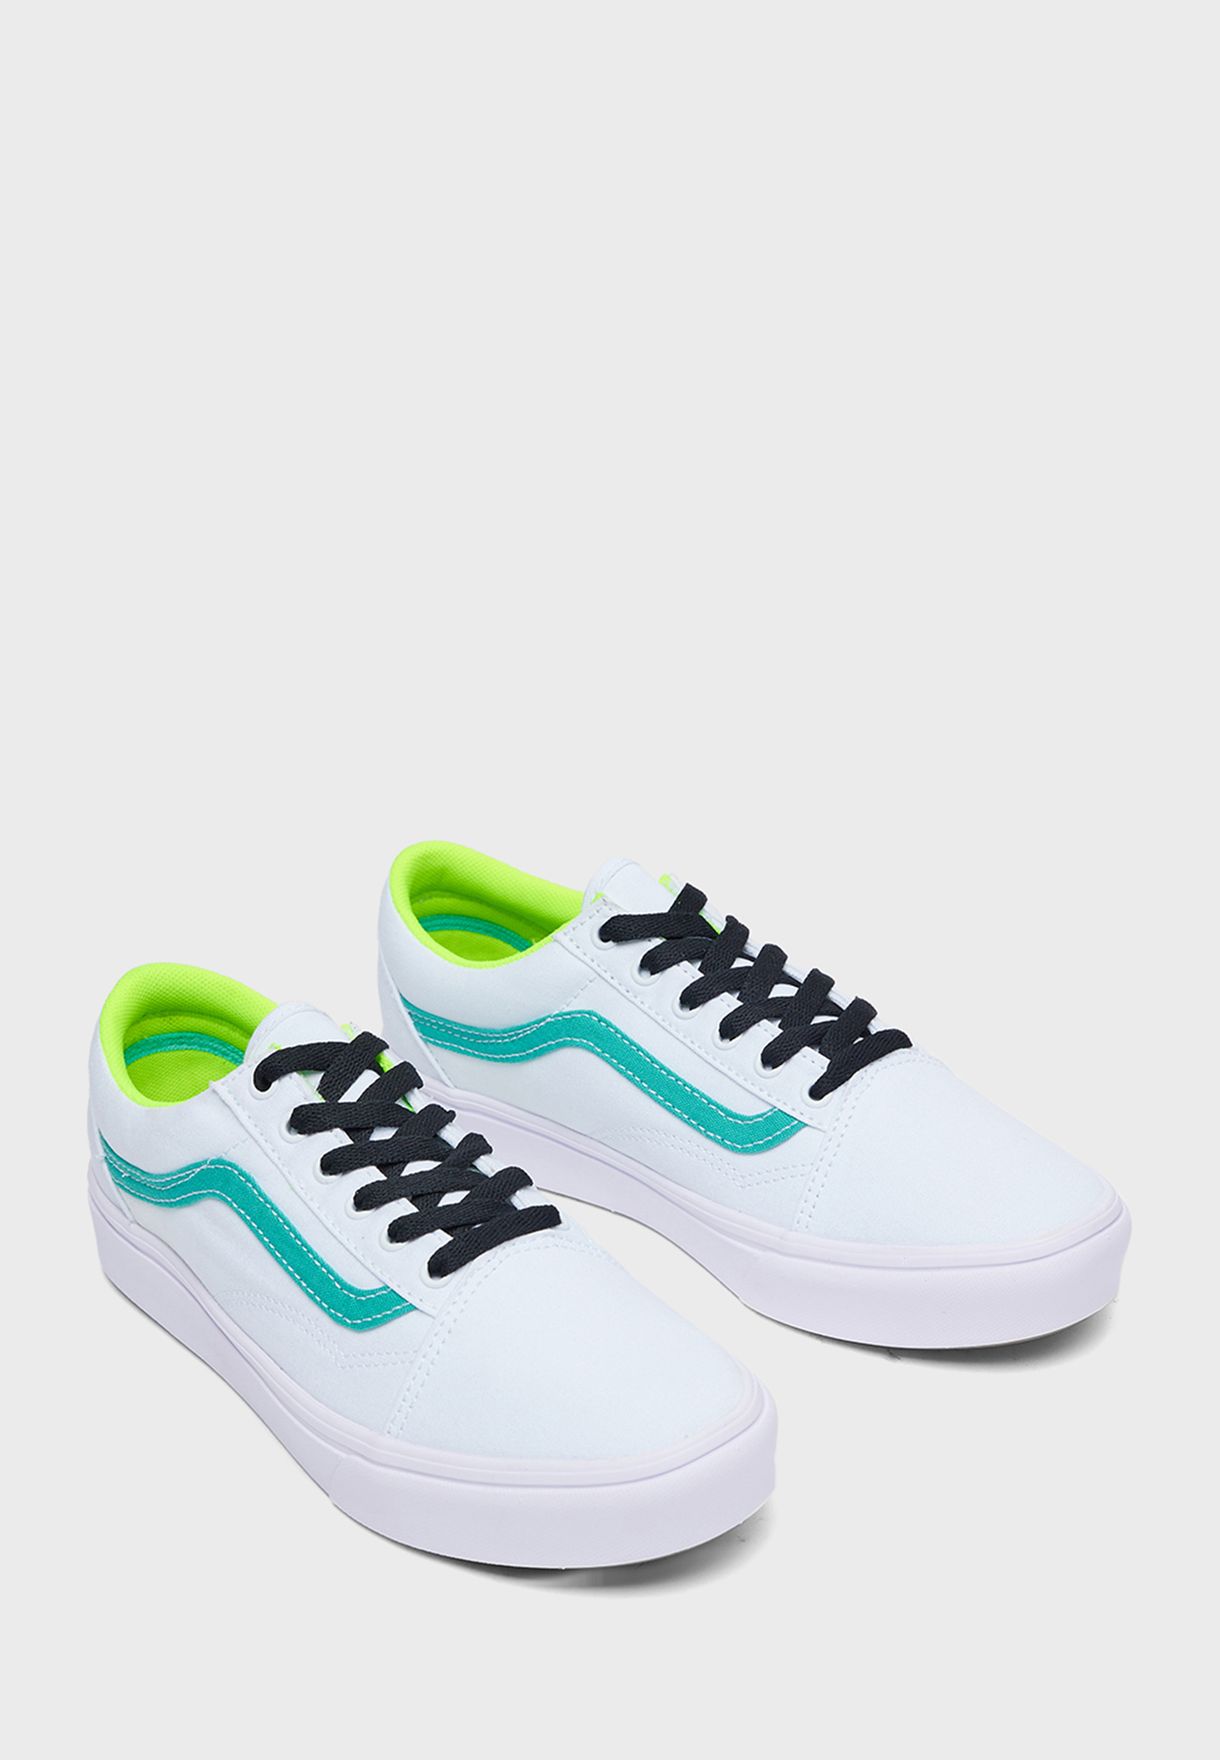 Youth Unisex Comfycush Old Skool Sneakers